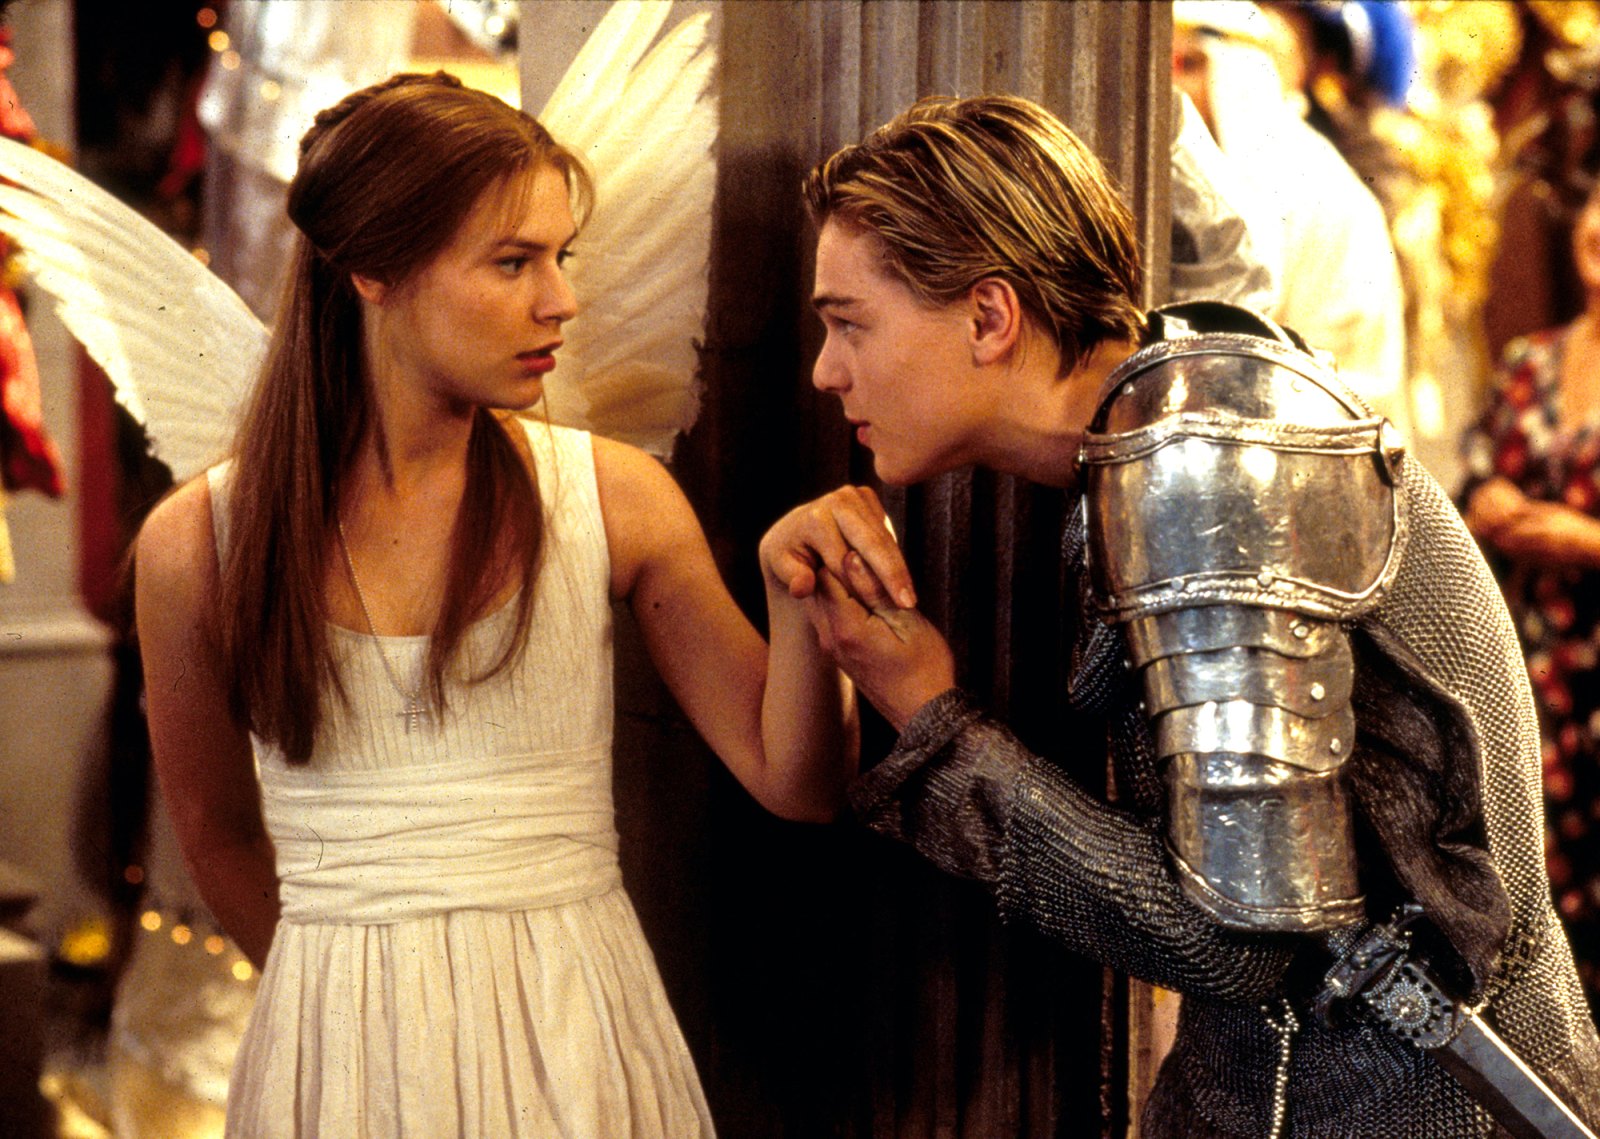 'Romeo + Juliet' Cast: Where Are They Now?